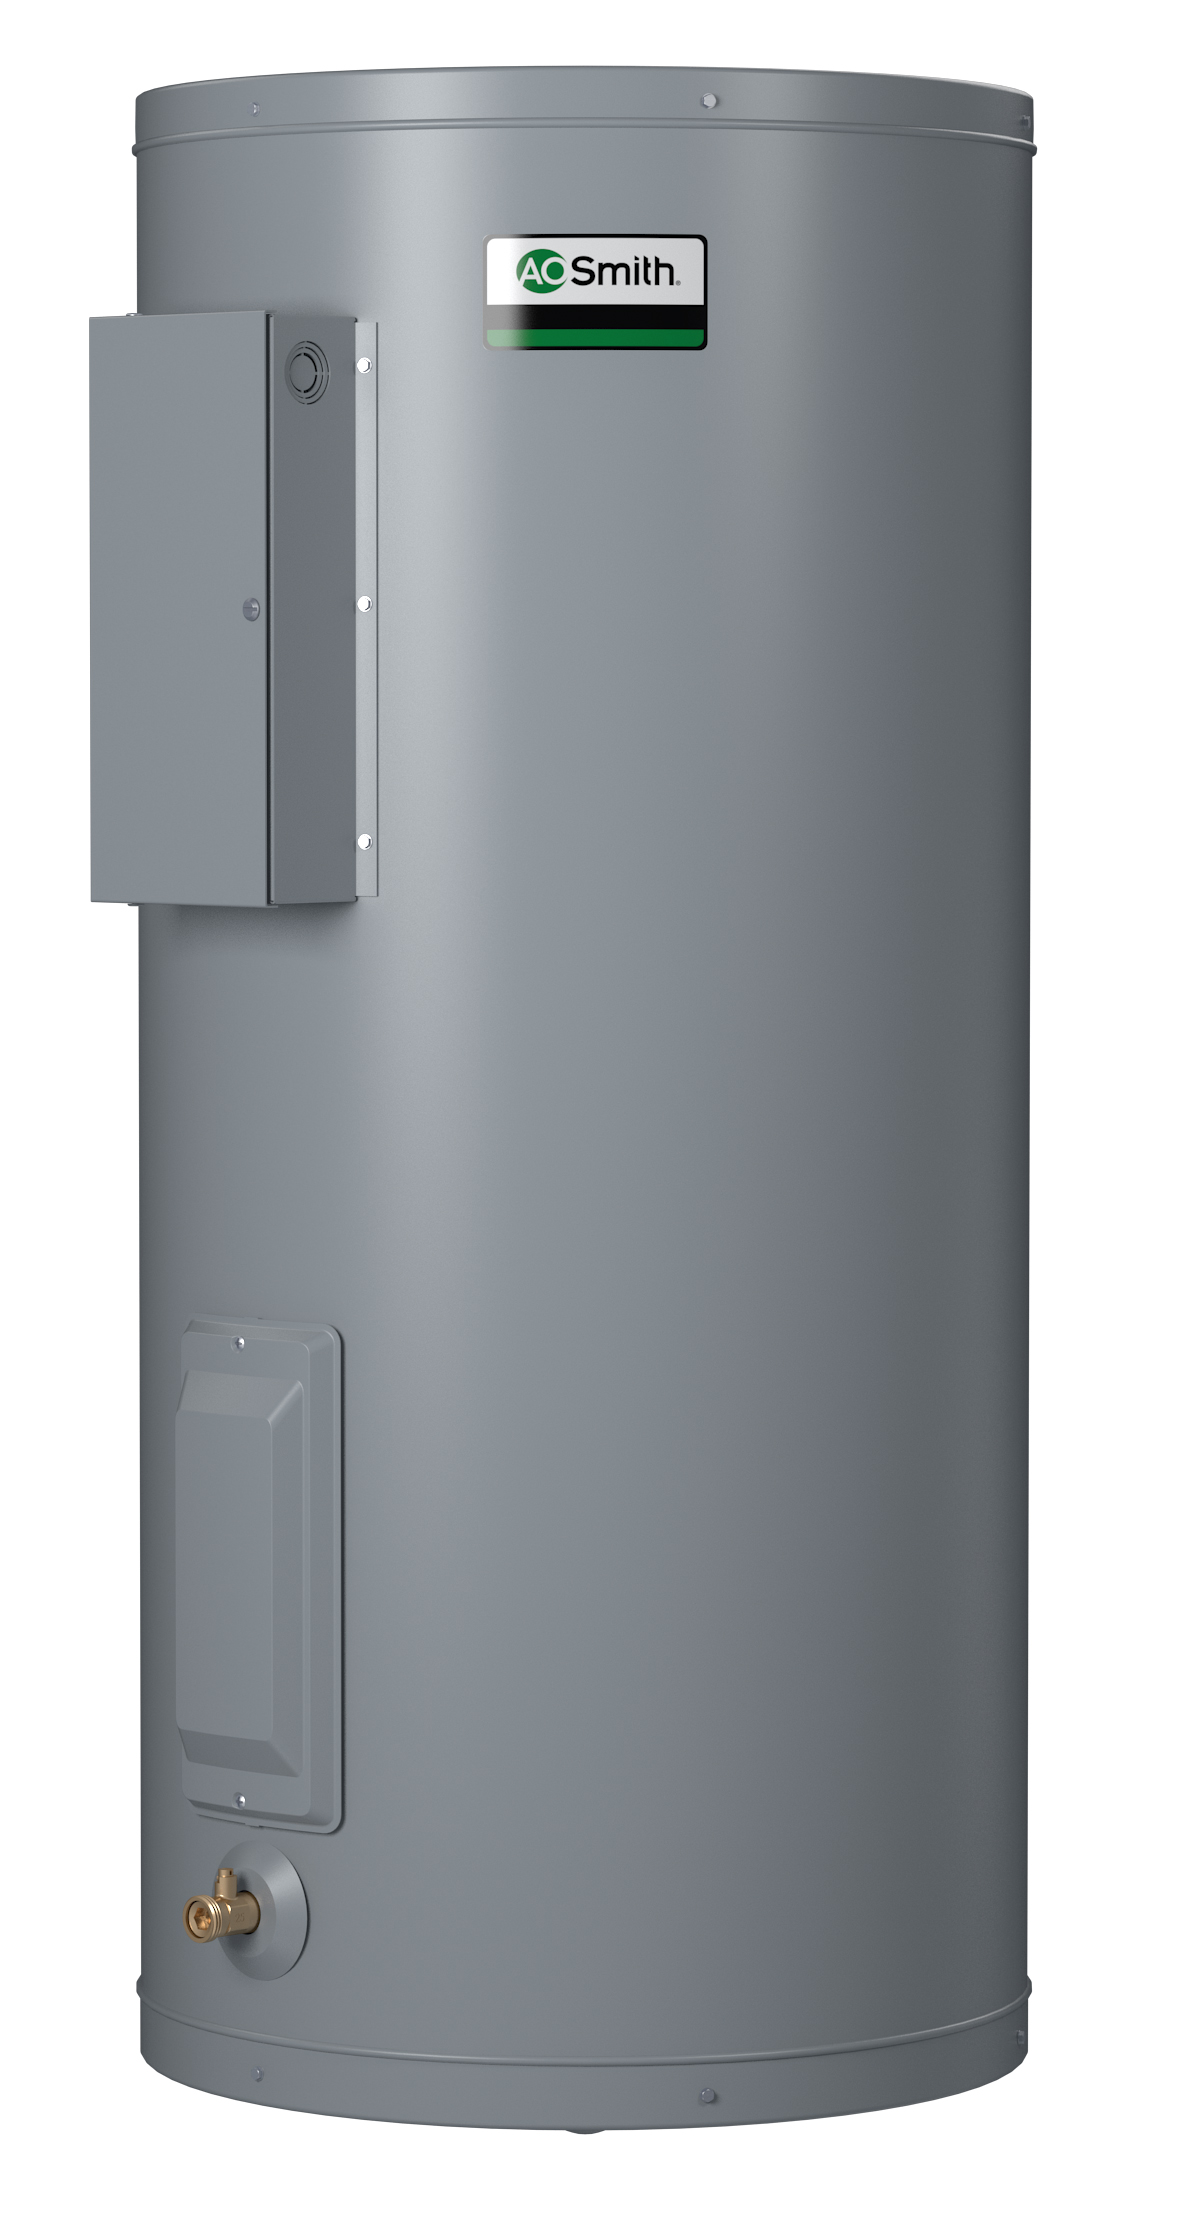 AO SMITH DEN-120D: 120 GALLONS, 2.5 KW, 480 VOLT, 3 PHASE, (2-2500 WATT ELEMENTS, NON-SIMULTANEOUS WIRING), DURA-POWER, LIGHT DUTY COMMERCIAL ELECTRIC WATER HEATER